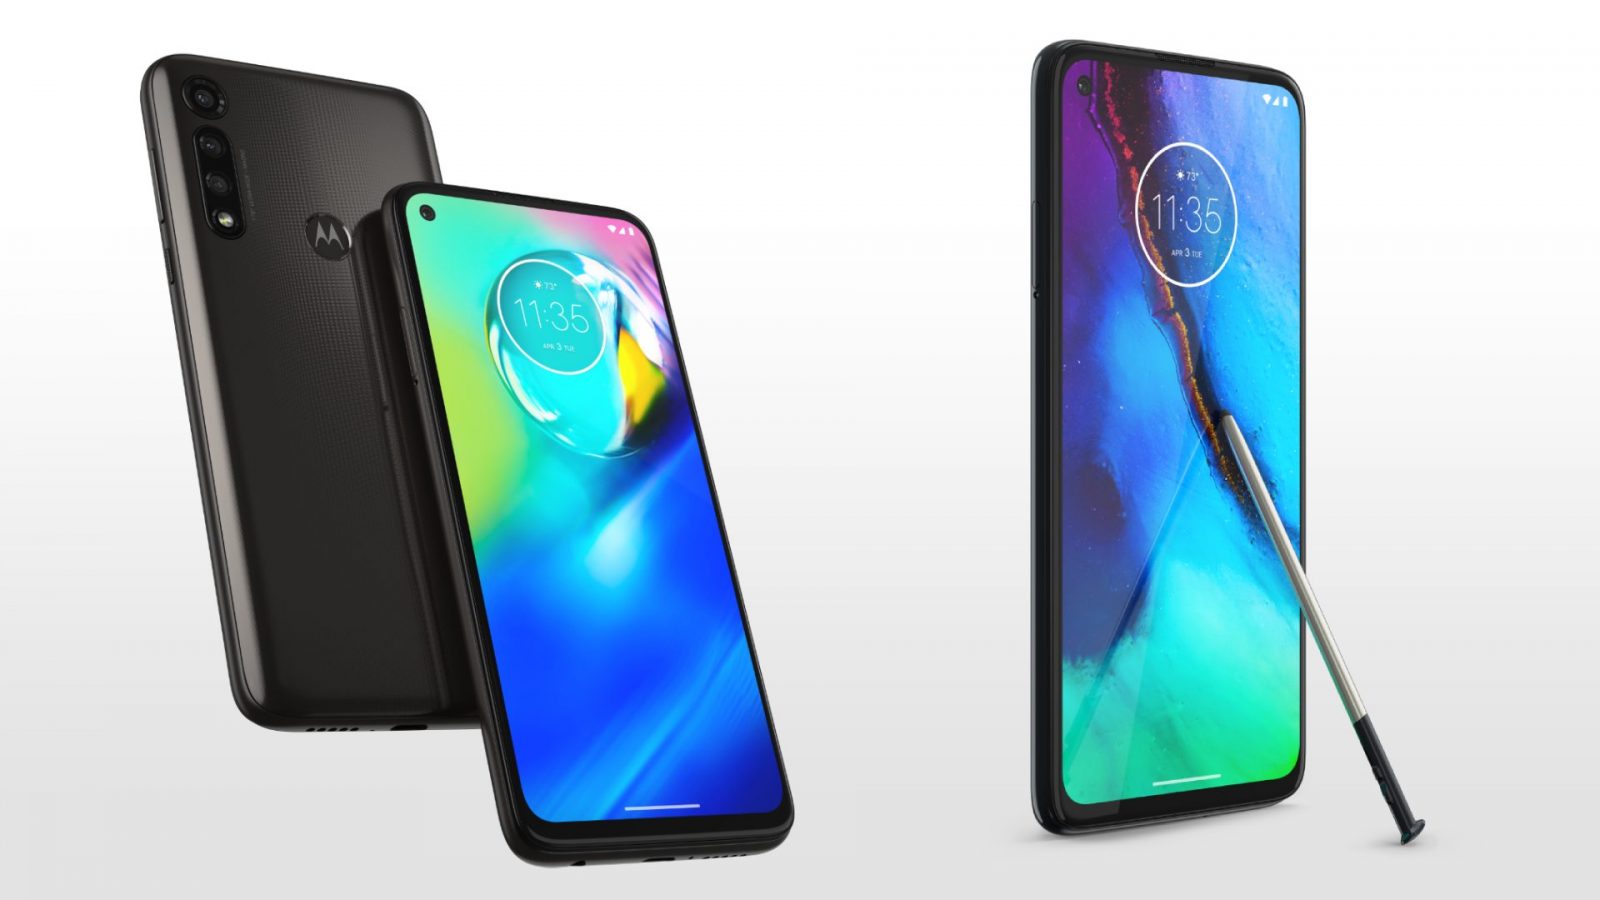 Motorola is back for 2020! Moto G8 Power is coming with